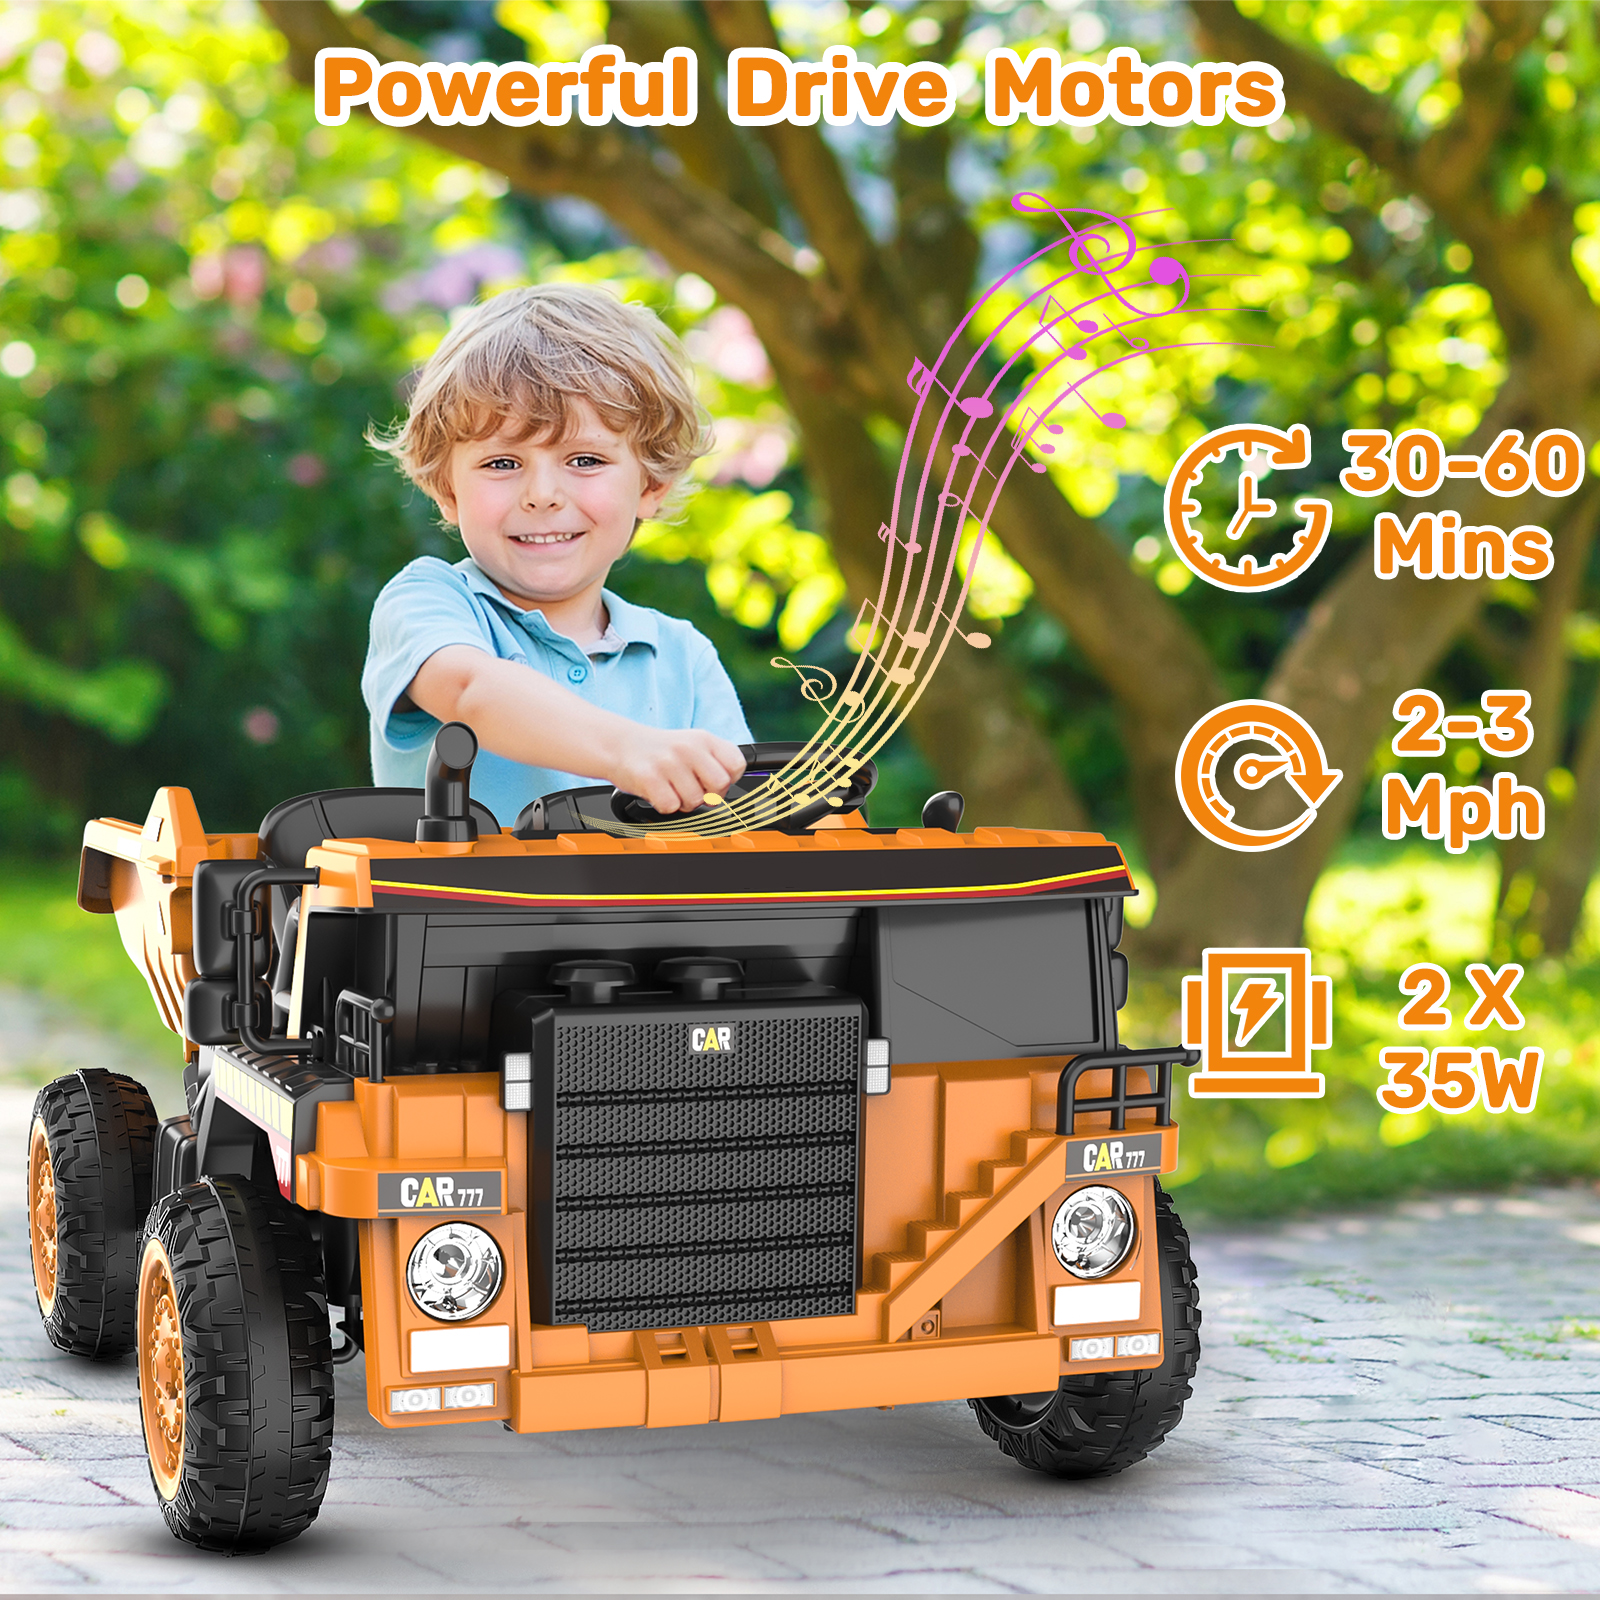 TOKTOO 12V Battery Powered Ride-on Dump Truck with Remote Control, Music Player, Electric Dump Bucket, Kids Tractor -Ginger Yellow - image 5 of 7